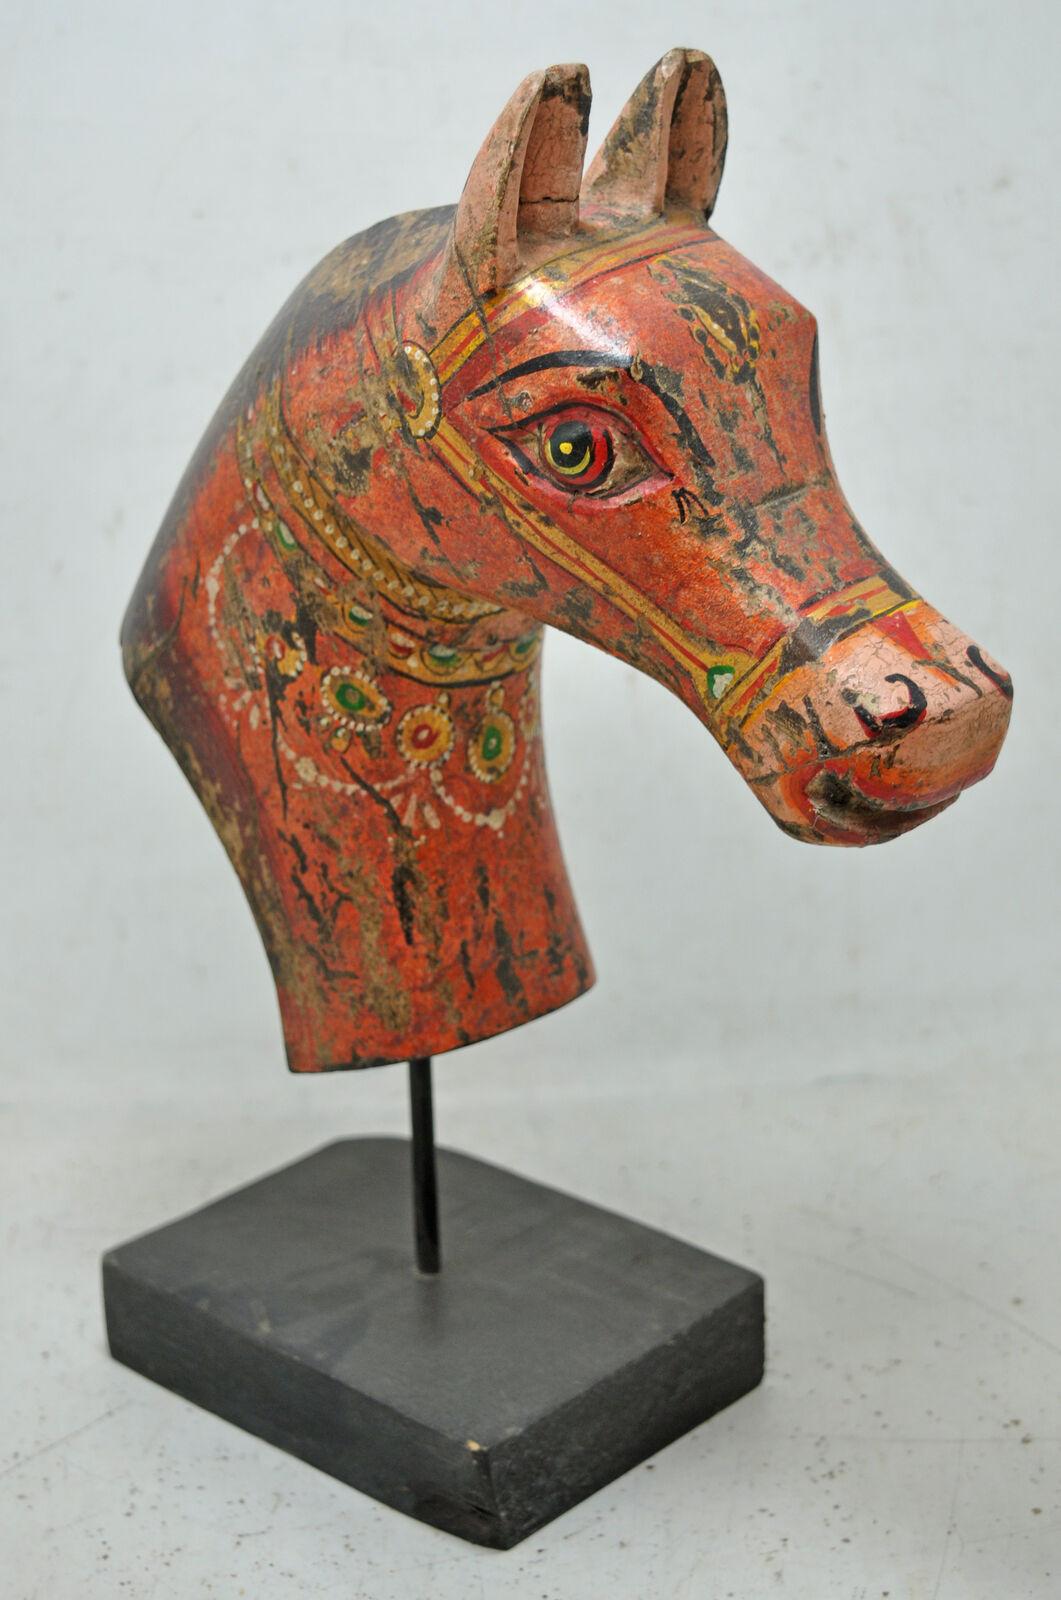 Hand-Carved and Painted Antique South Asian Folk Art Wooden Sculptural Horse Bust Decoration

Anonymous
Southern Asia; first-half of the 20th century
Polychromed wood

Approximate size: 3.6 x 8.8 x 13.6 in.

A distinctive display piece for a Rustic